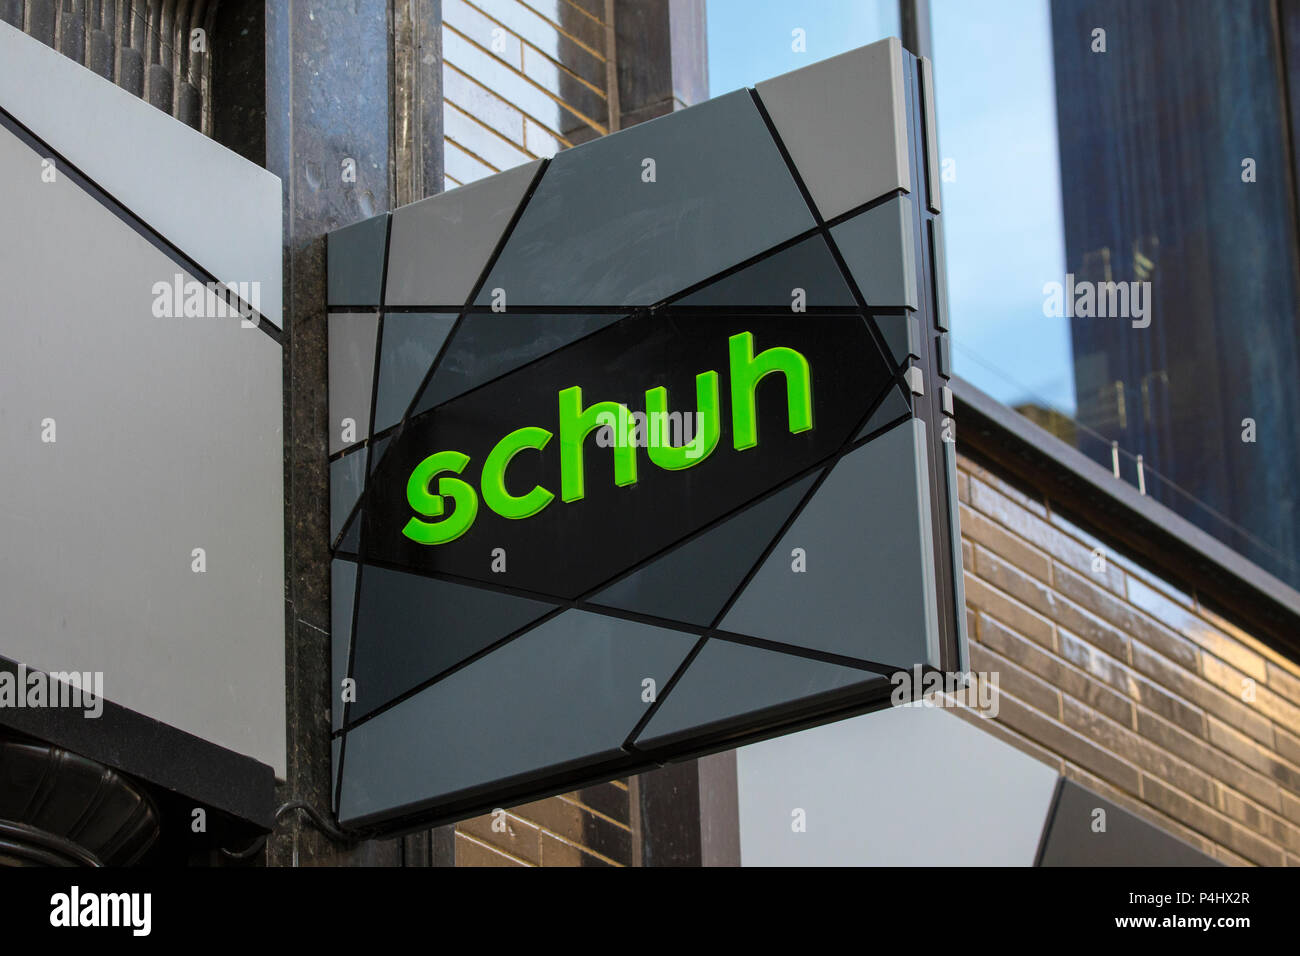 LONDON, UK - FEBRUARY 16TH 2018: A sign above the shop entrance to Schuh, located on Oxford Street in London, UK, on 16th February 2018.  Schuh is a f Stock Photo